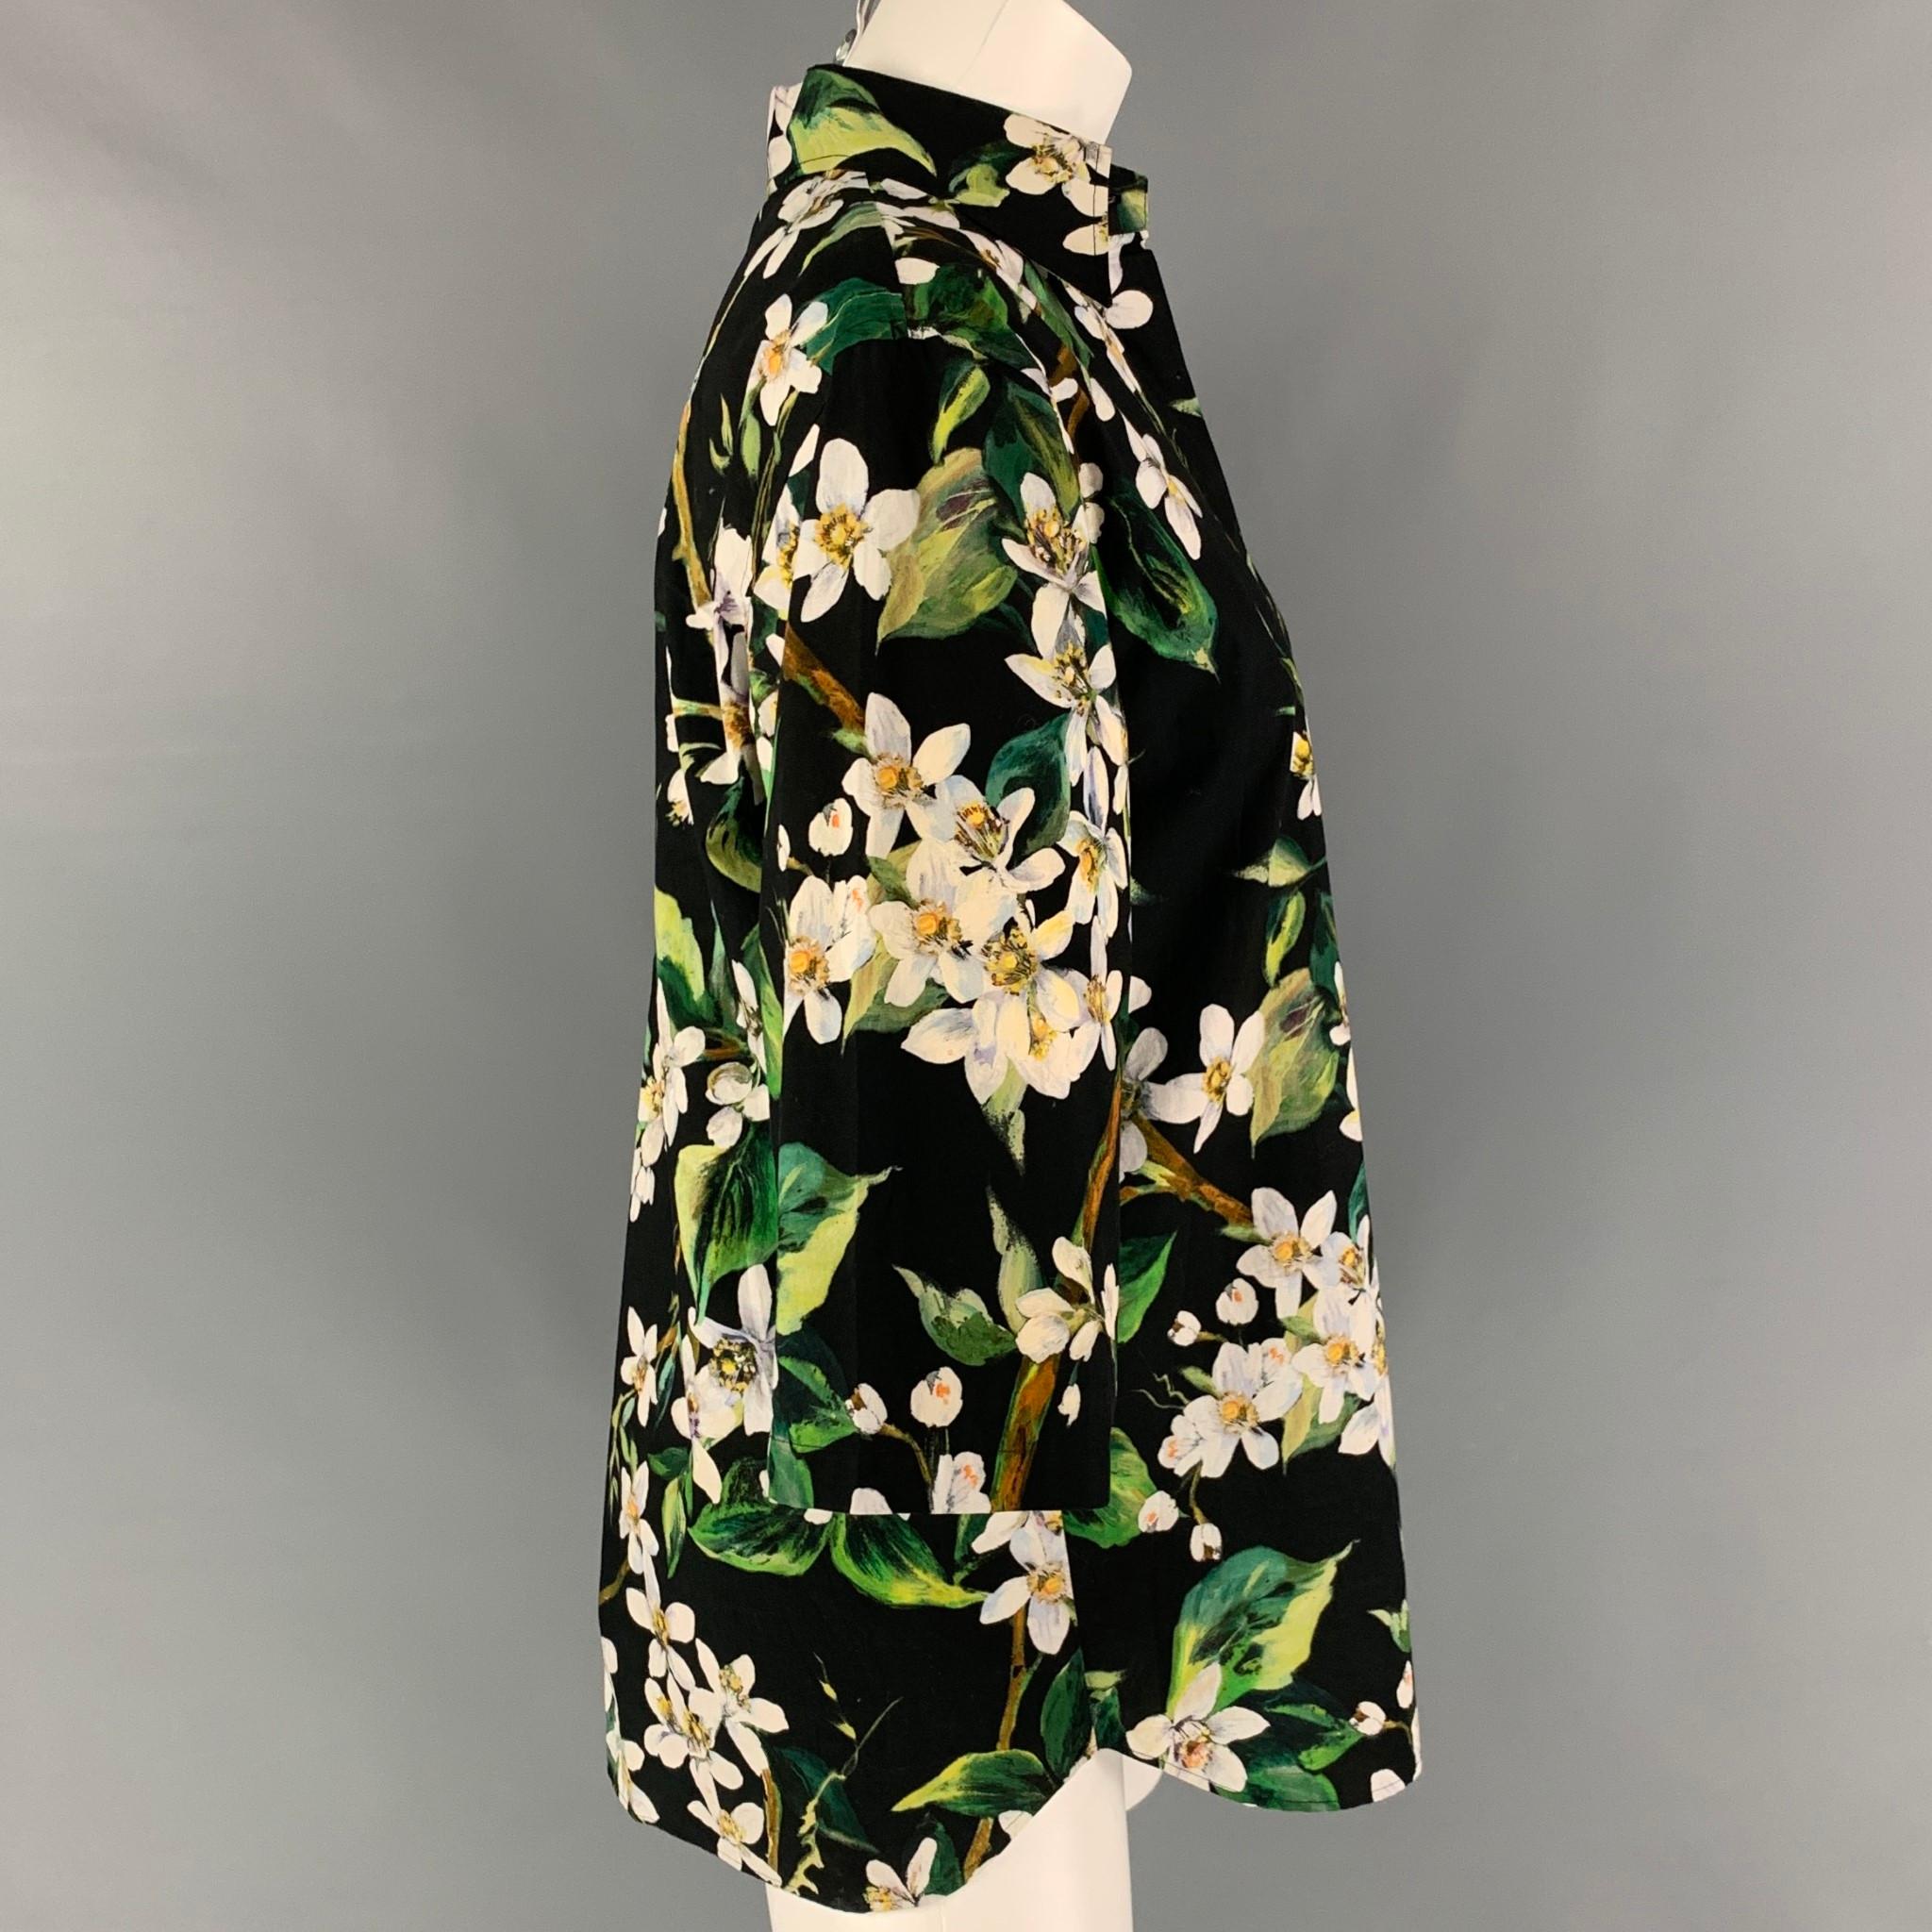 DOLCE & GABBANA shirt comes in a black & green floral cotton featuring 3/4 sleeve, pointed collar, and a hidden placket closure. Made in Italy. 

Very Good Pre-Owned Condition.
Marked: 40

Measurements:

Shoulder: 17 in.
Bust: 38 in.
Sleeve: 15